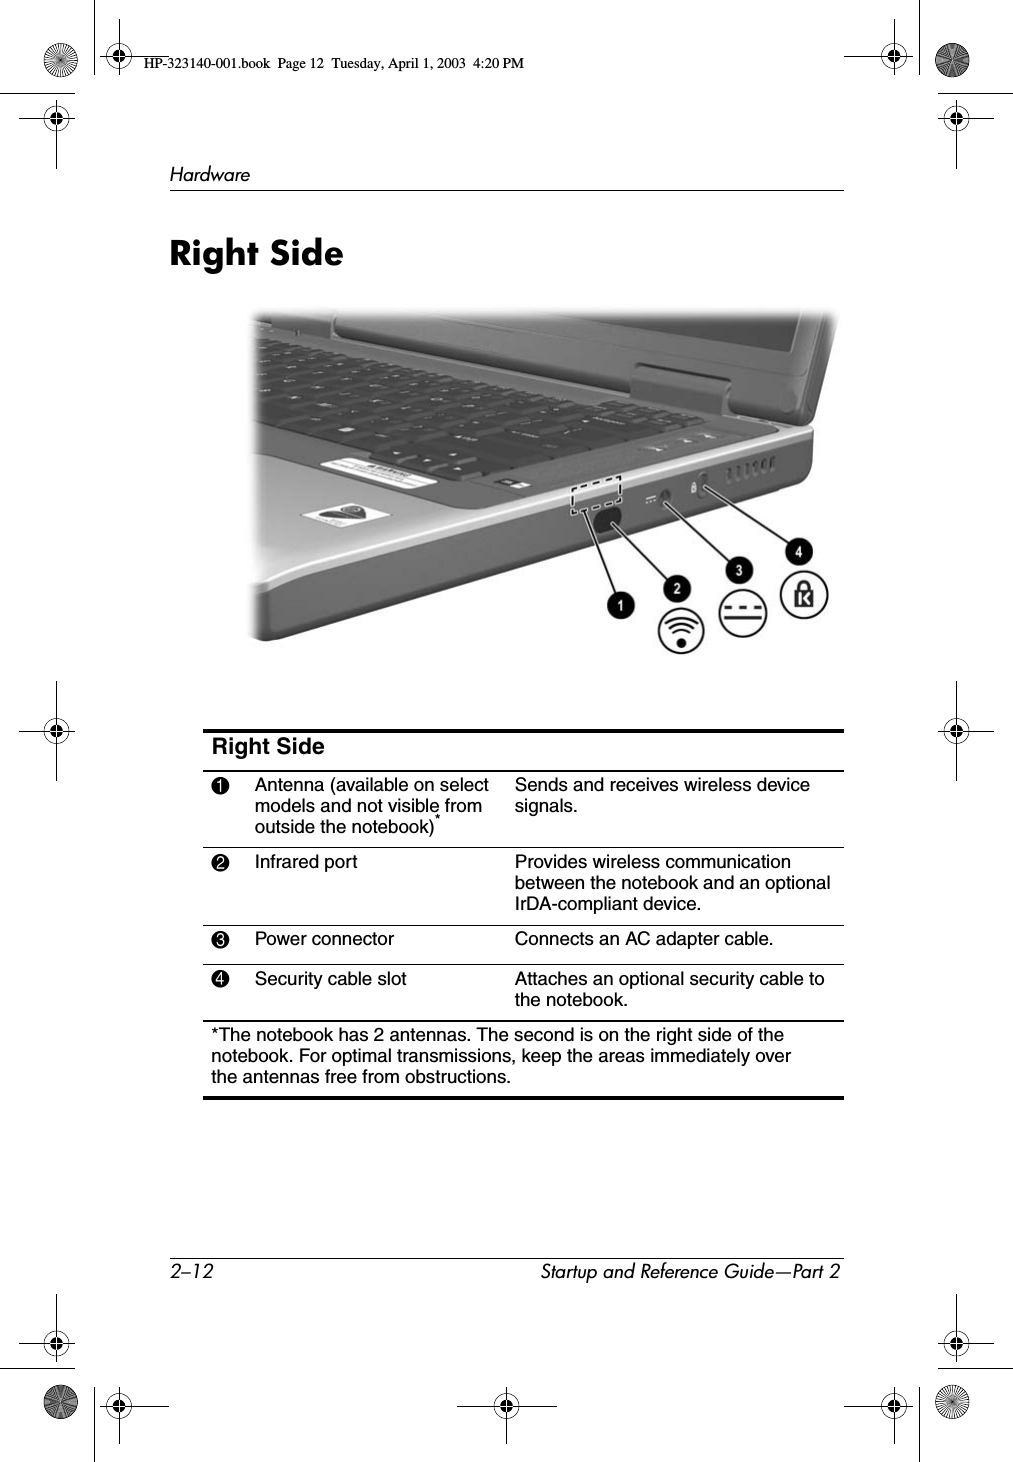 2–12 Startup and Reference Guide—Part 2HardwareRight SideRight Side1Antenna (available on select models and not visible from outside the notebook)*Sends and receives wireless device signals.2Infrared port  Provides wireless communication between the notebook and an optional IrDA-compliant device.3Power connector Connects an AC adapter cable.4Security cable slot Attaches an optional security cable to the notebook.*The notebook has 2 antennas. The second is on the right side of the notebook. For optimal transmissions, keep the areas immediately over the antennas free from obstructions.HP-323140-001.book  Page 12  Tuesday, April 1, 2003  4:20 PM